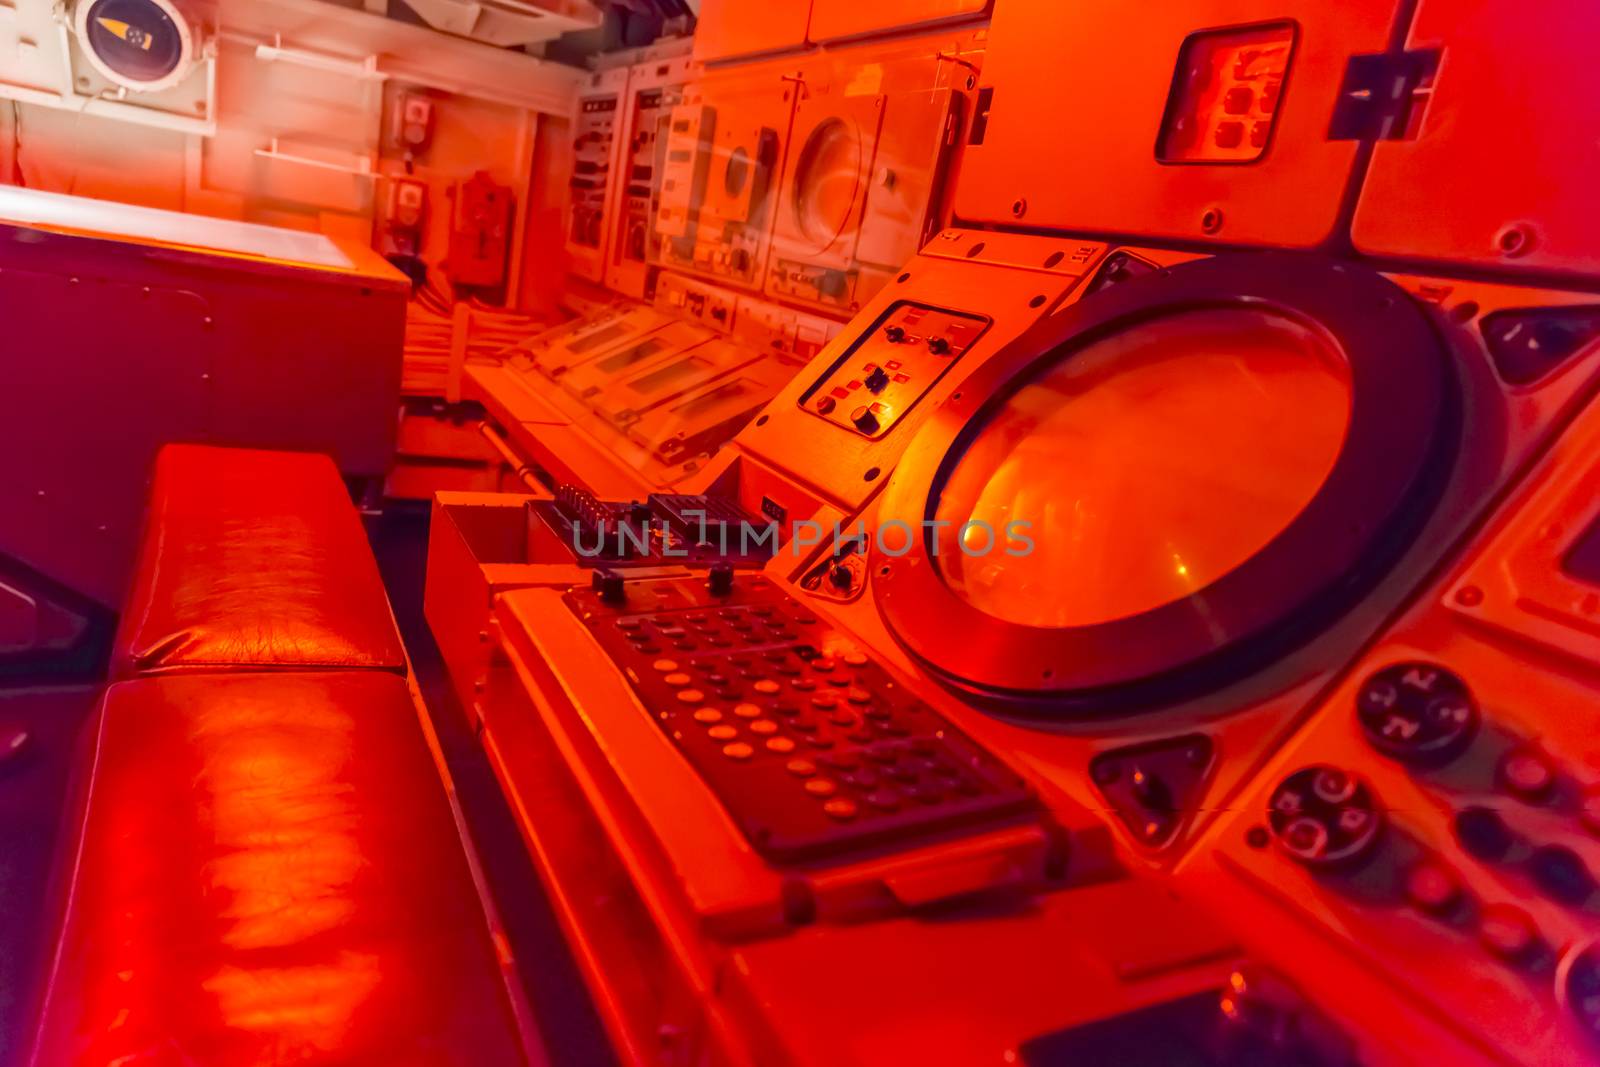 control room orange red light  by CatherineL-Prod